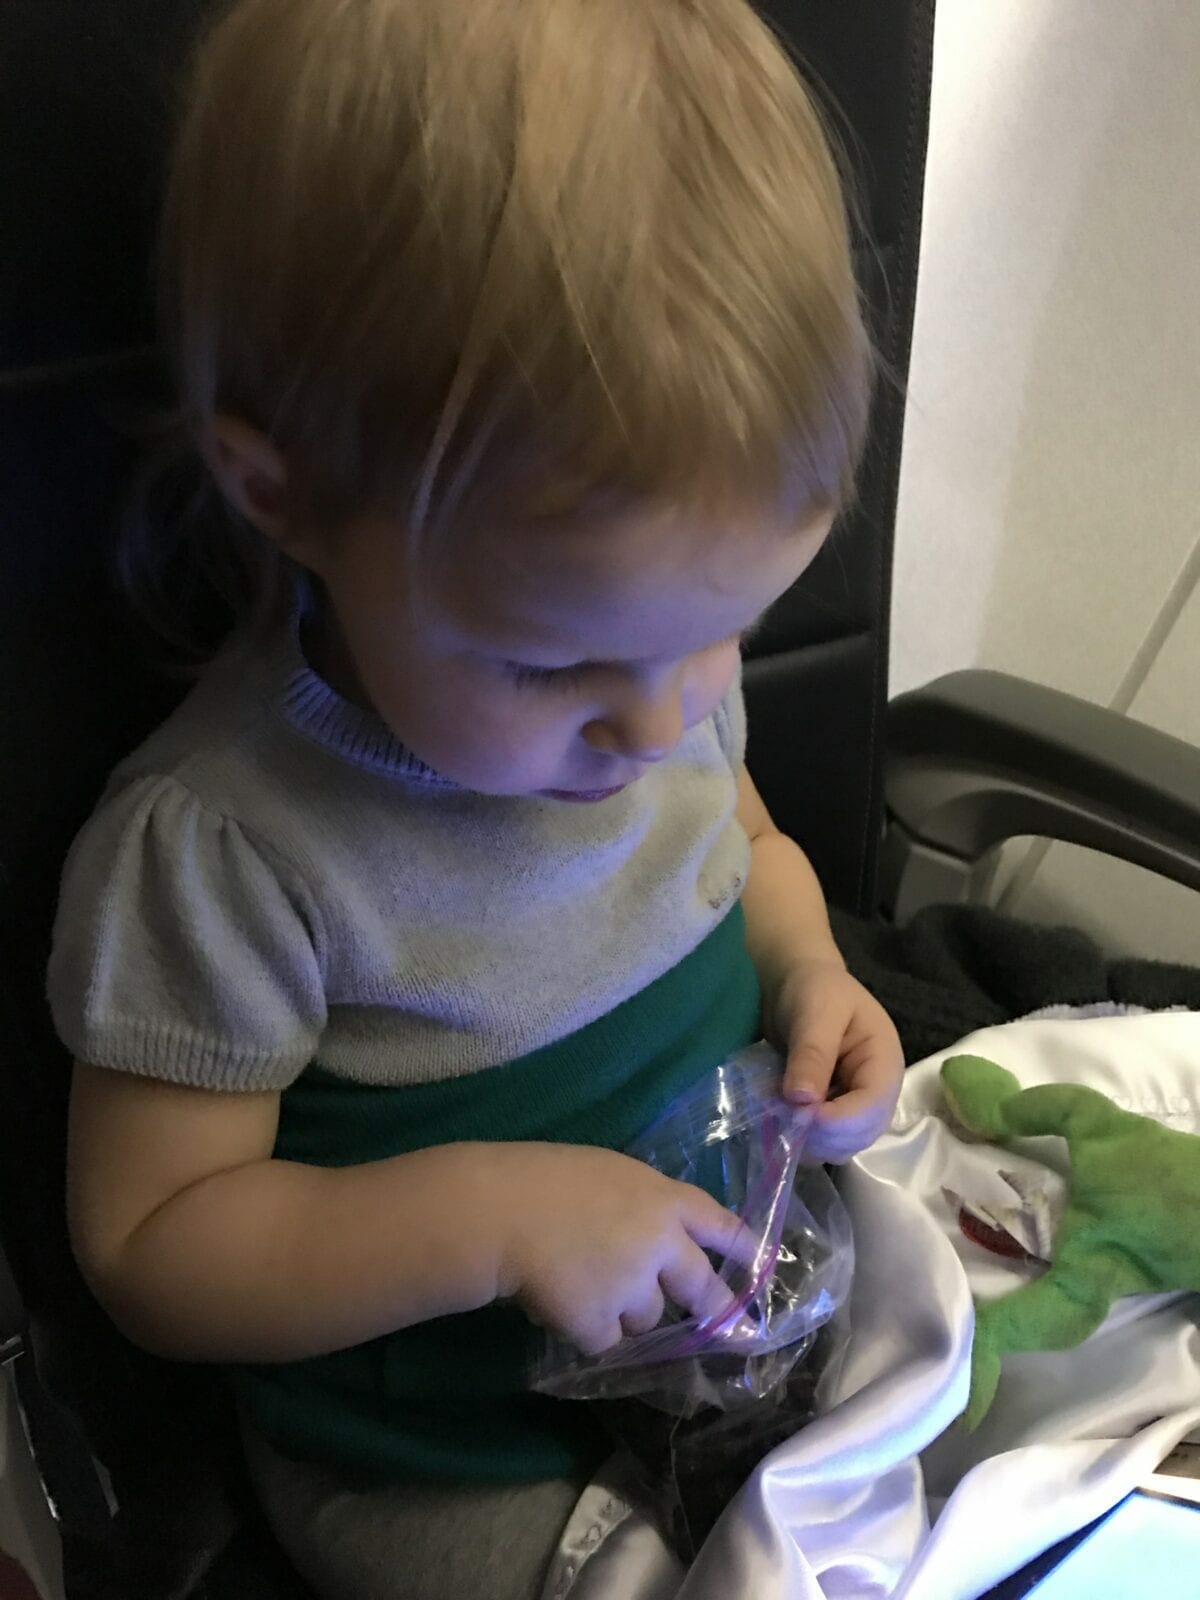 Child on plane eating grapes and watching iPad image.